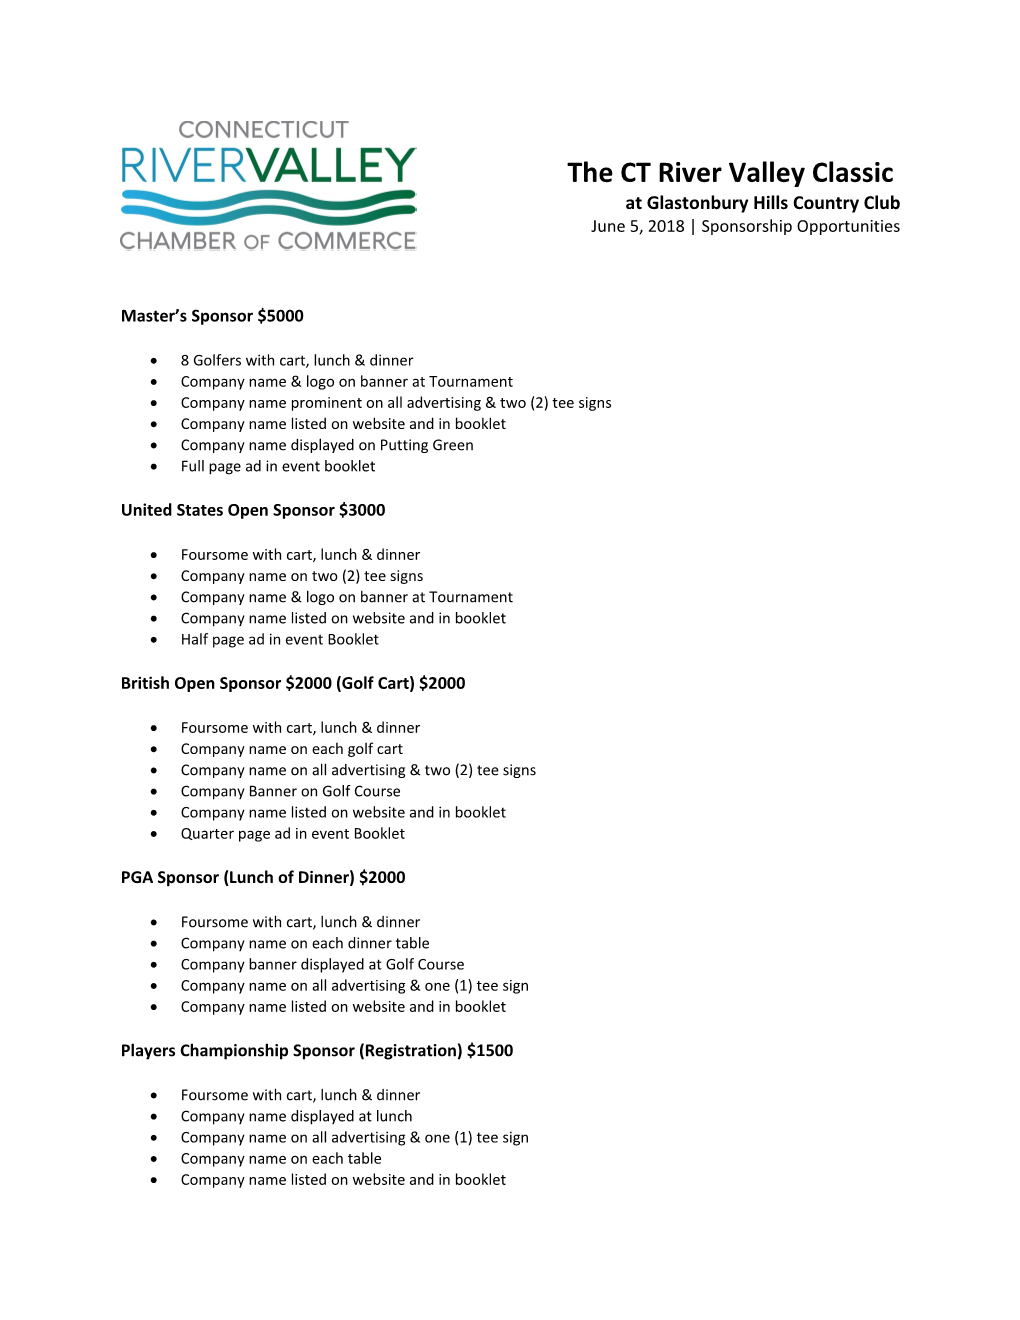 The CT River Valley Classic